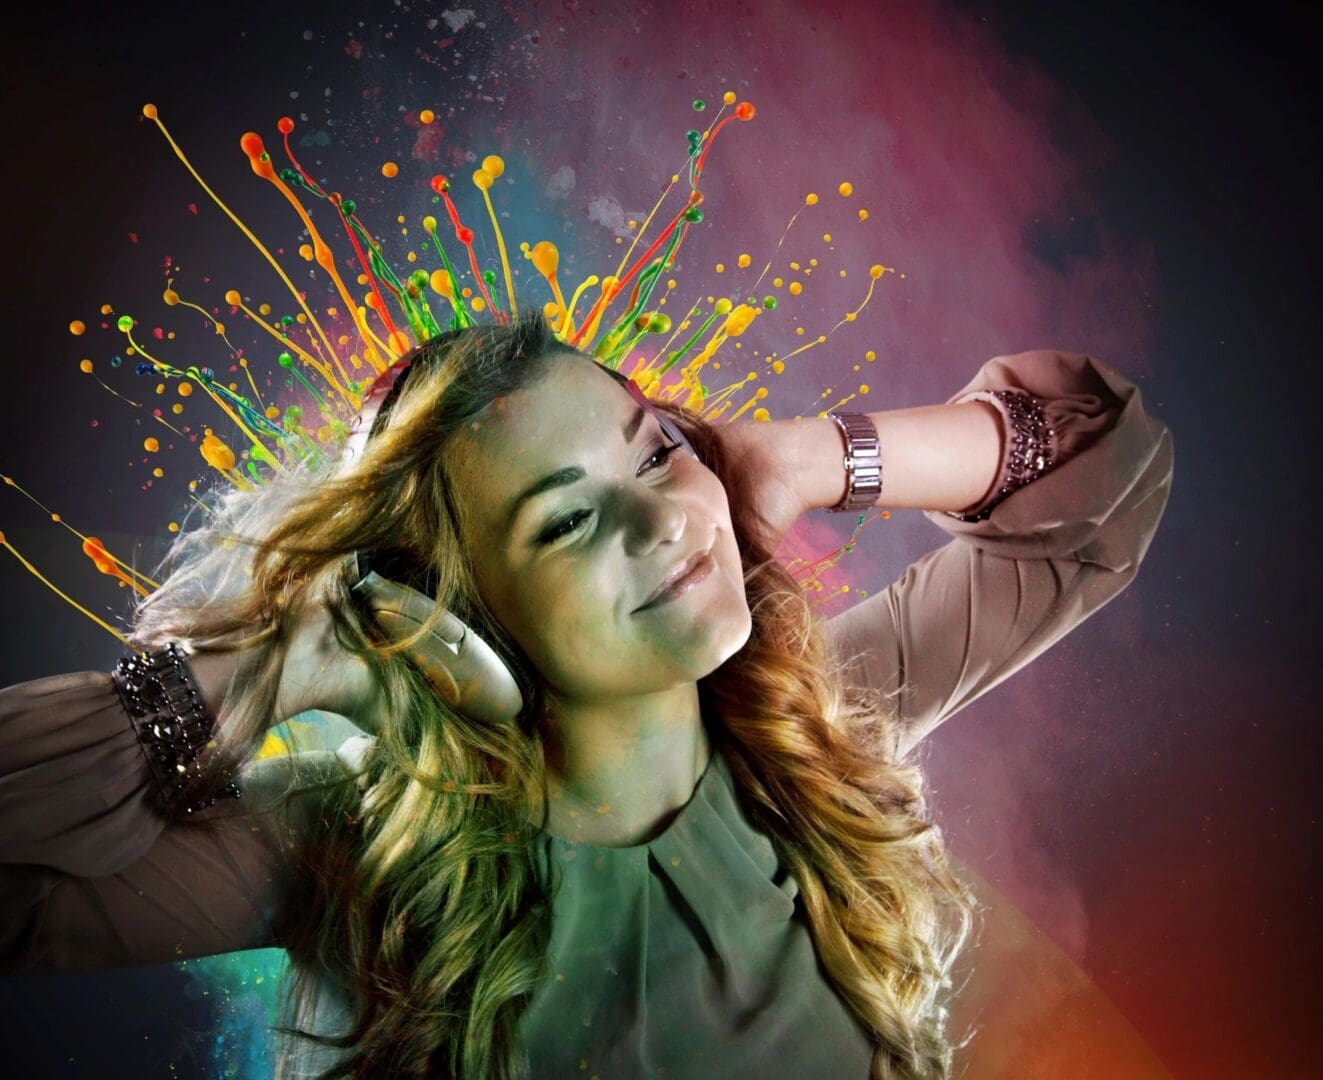 A woman with headphones on and colorful background